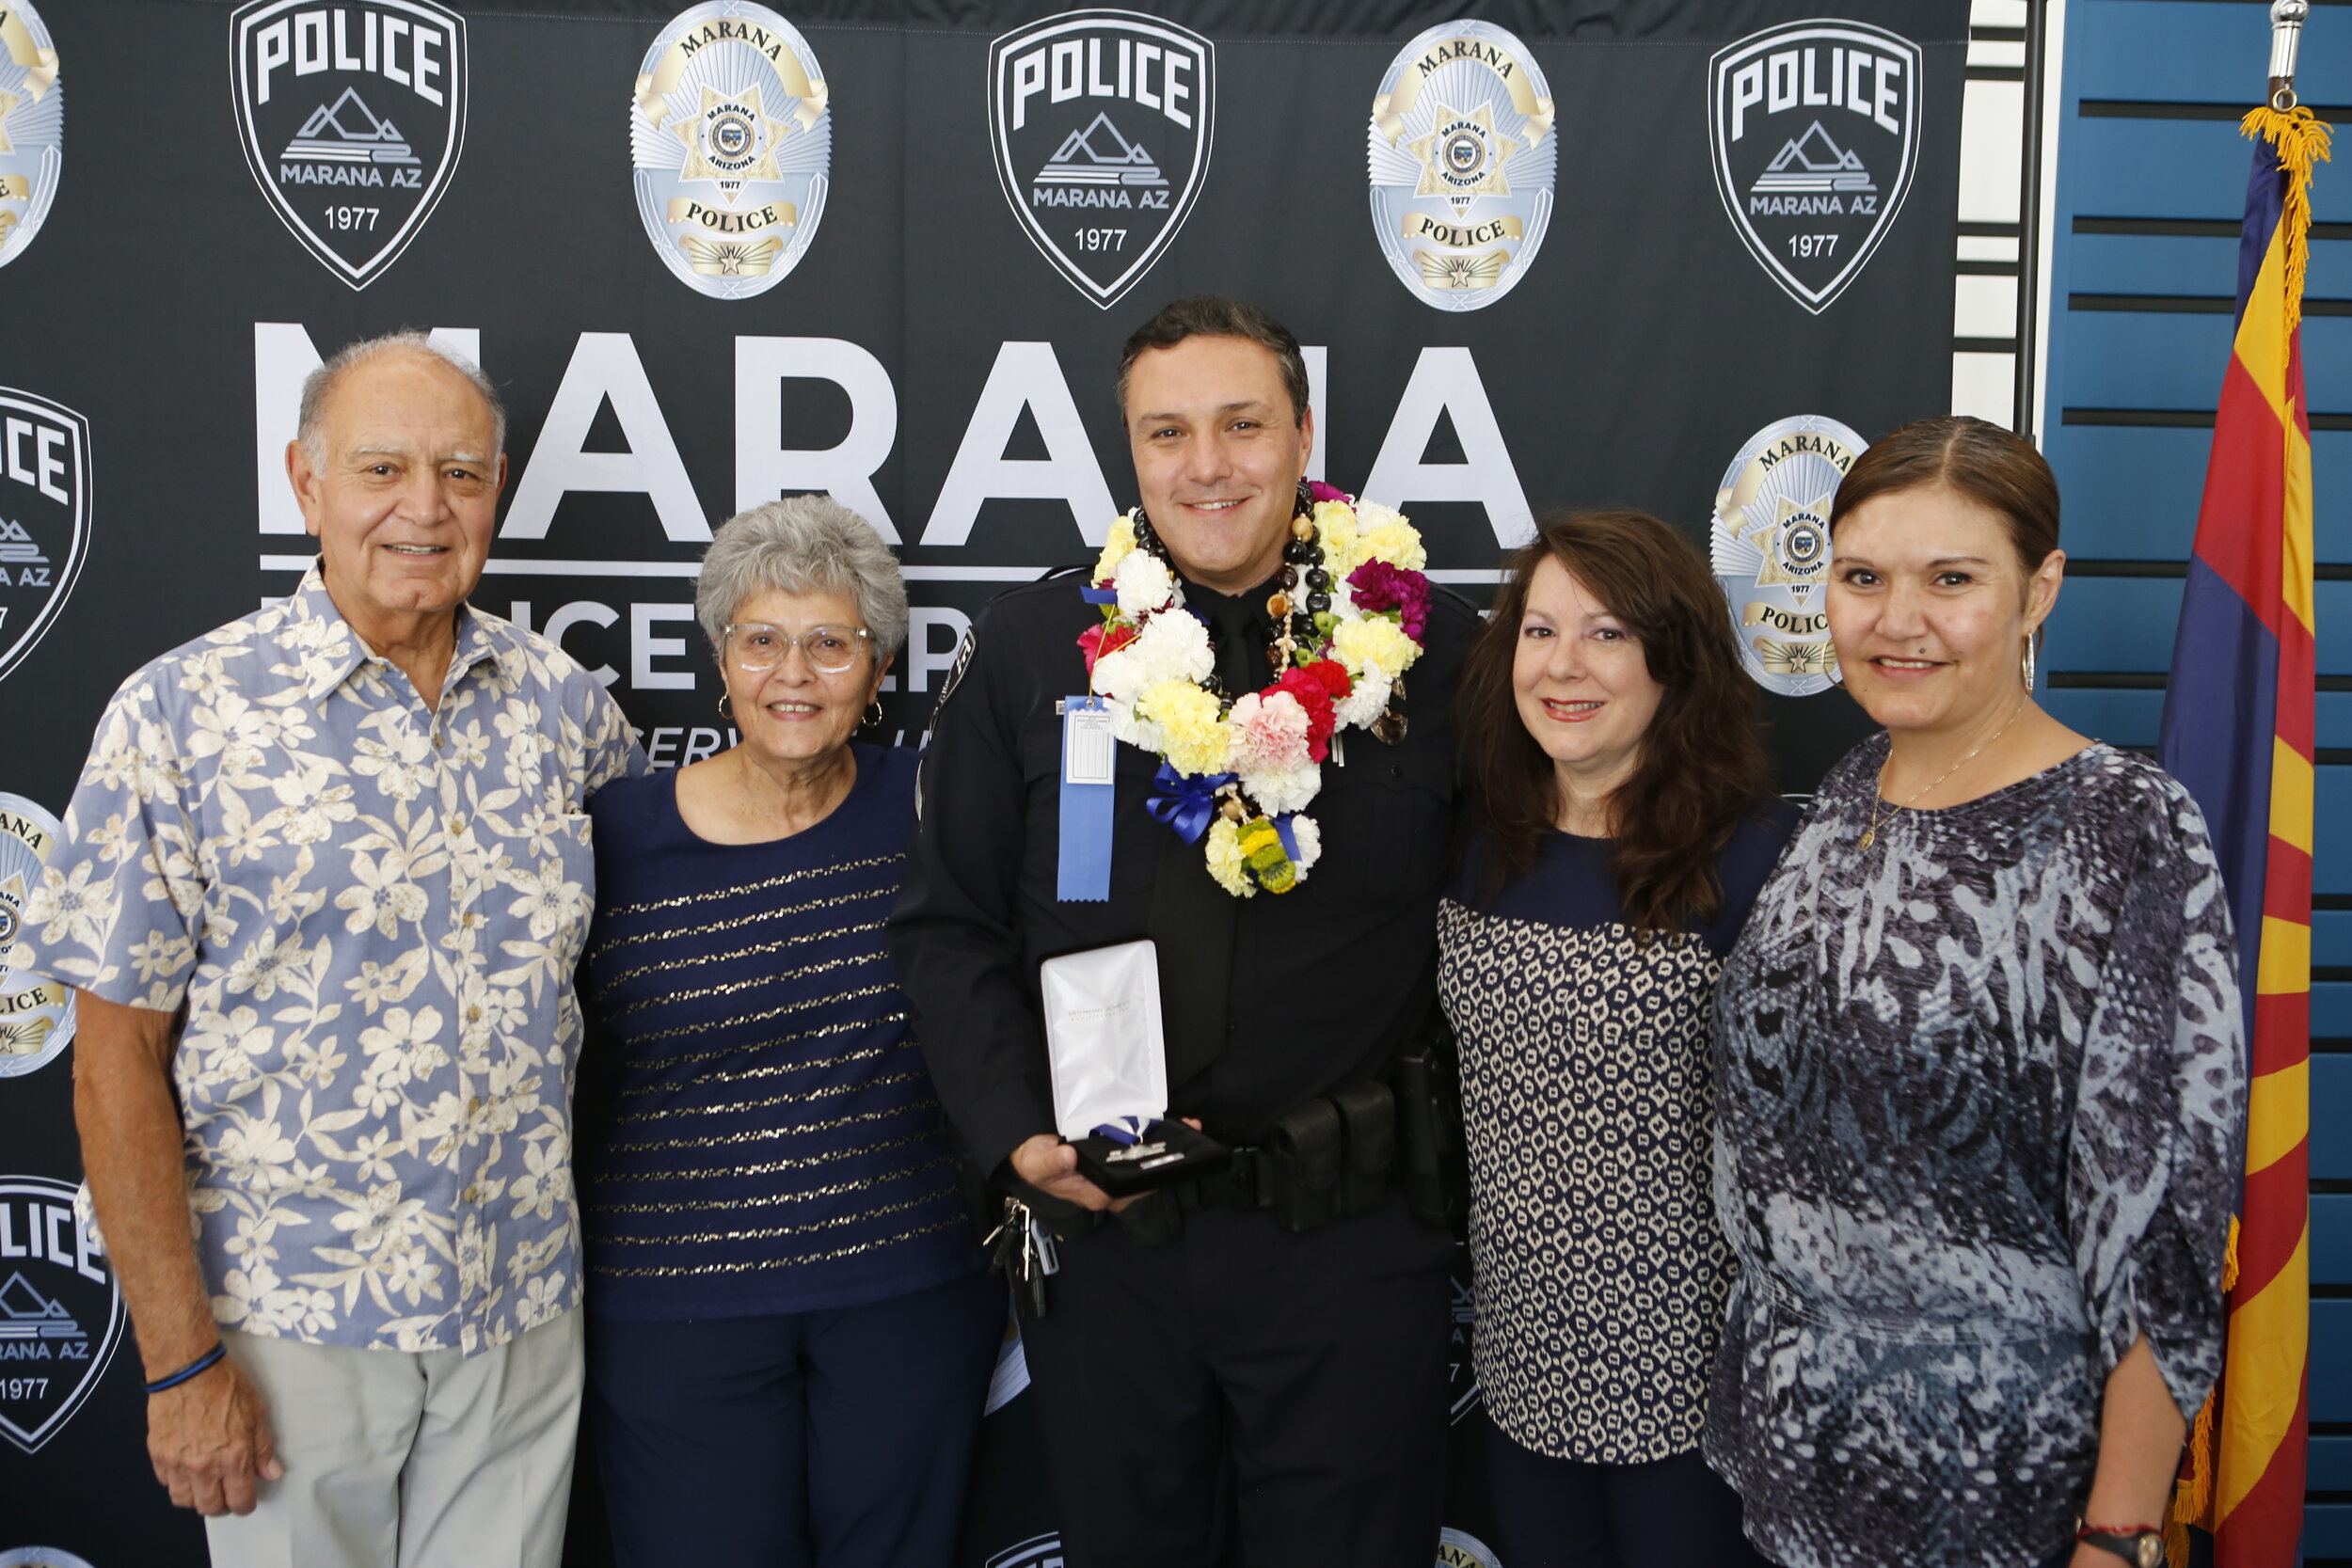  Officer Cabrera with family 